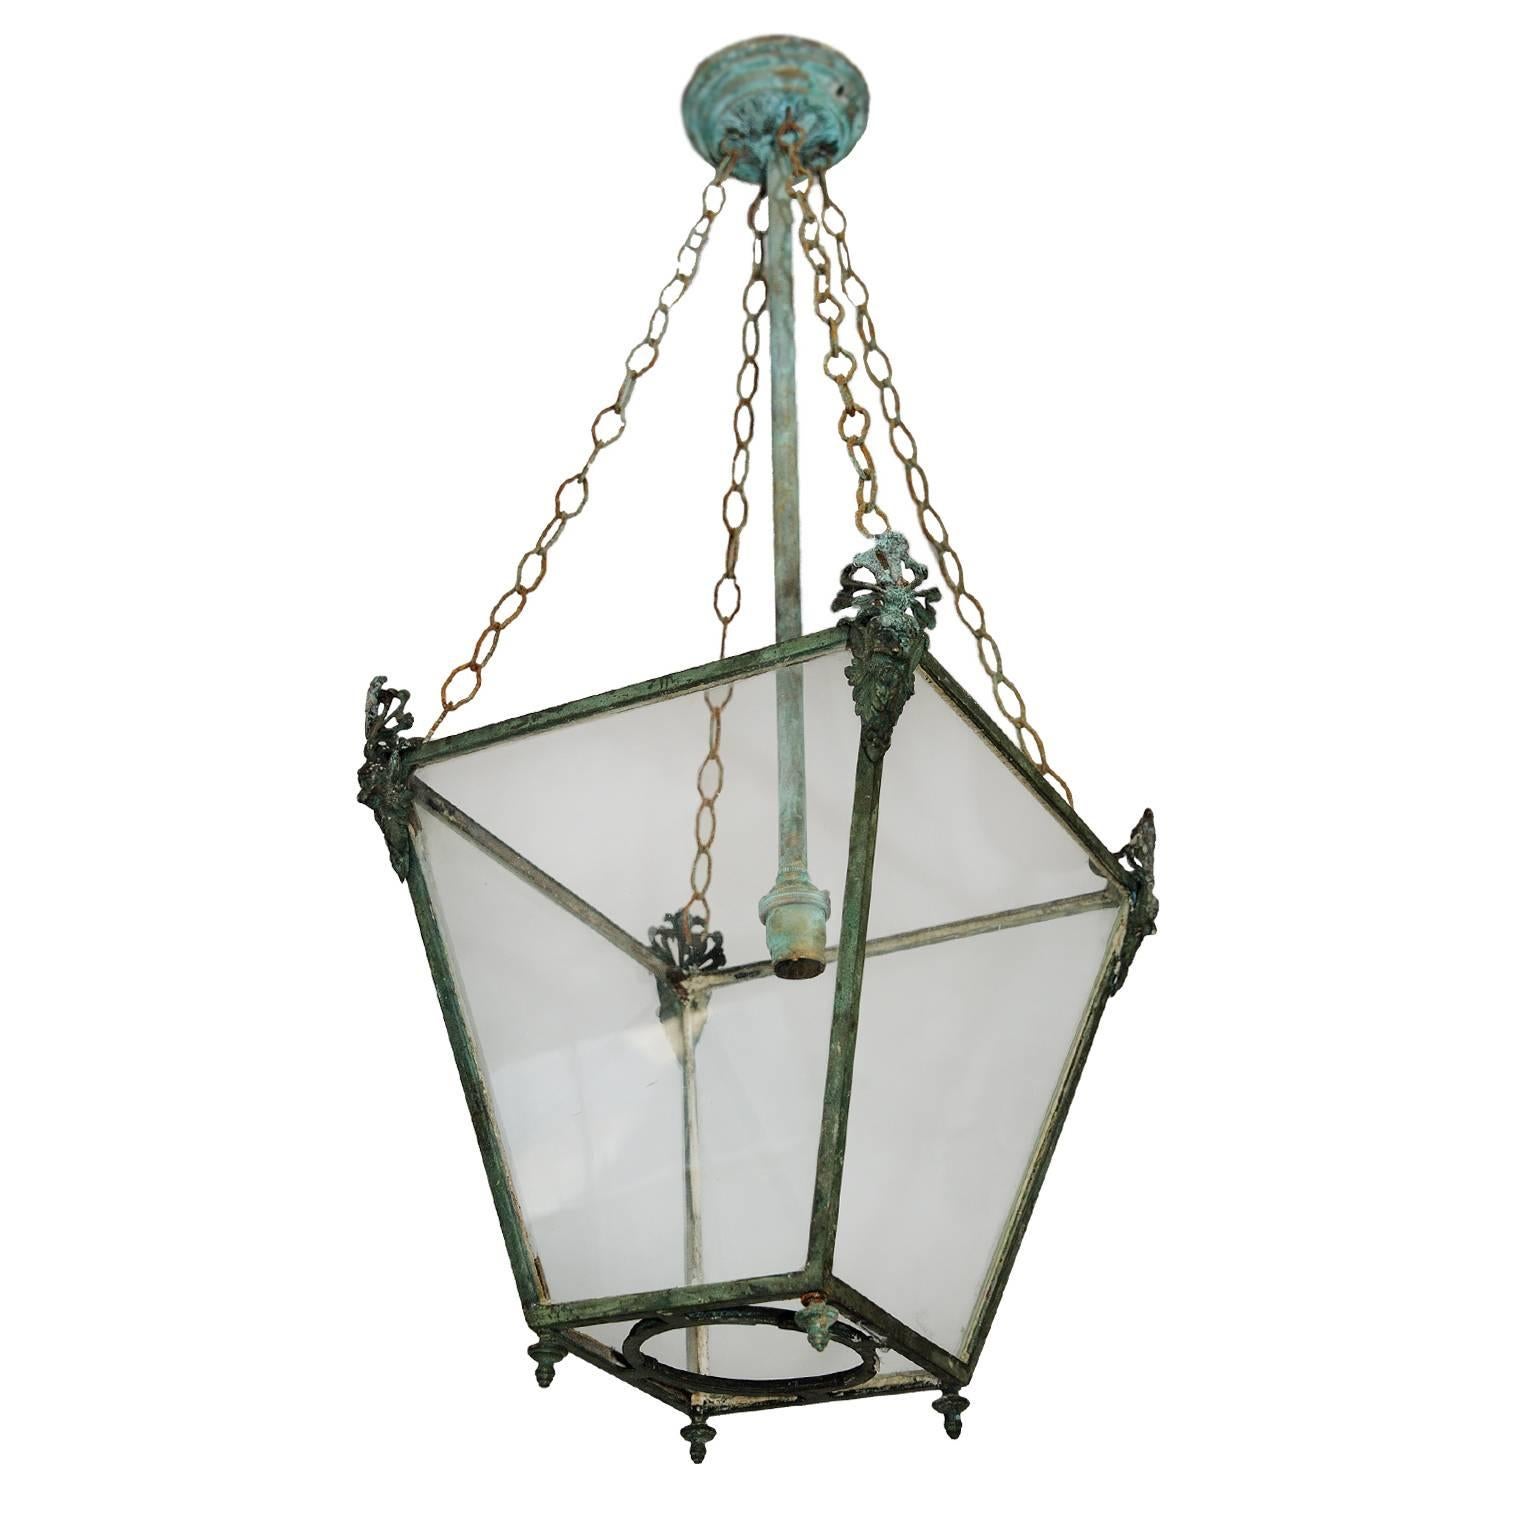 This is a rather beautiful English Regency verdigris bronze hanging lantern, made to a design by 'Tatham', circa 1810. 

The lantern has been re-wired and is ready to hang.